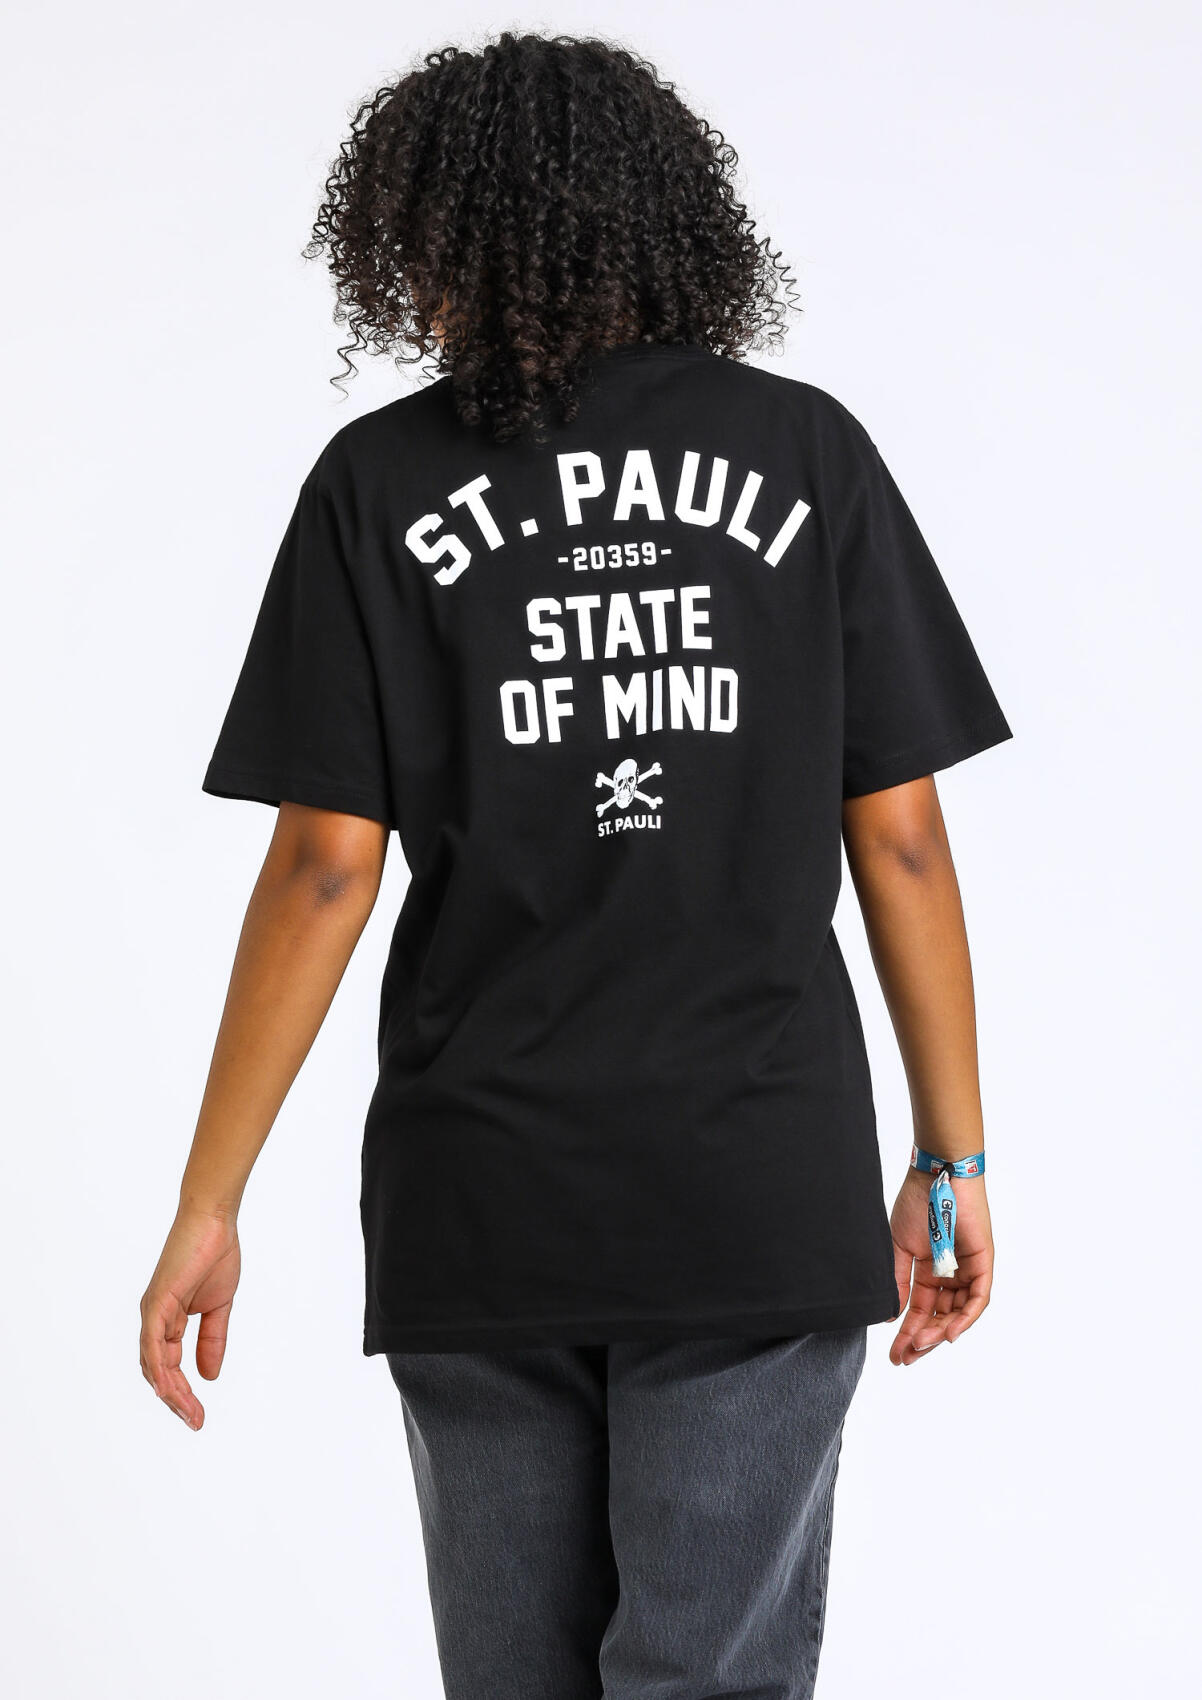 T-Shirt waisted "20359 State Of Mind"